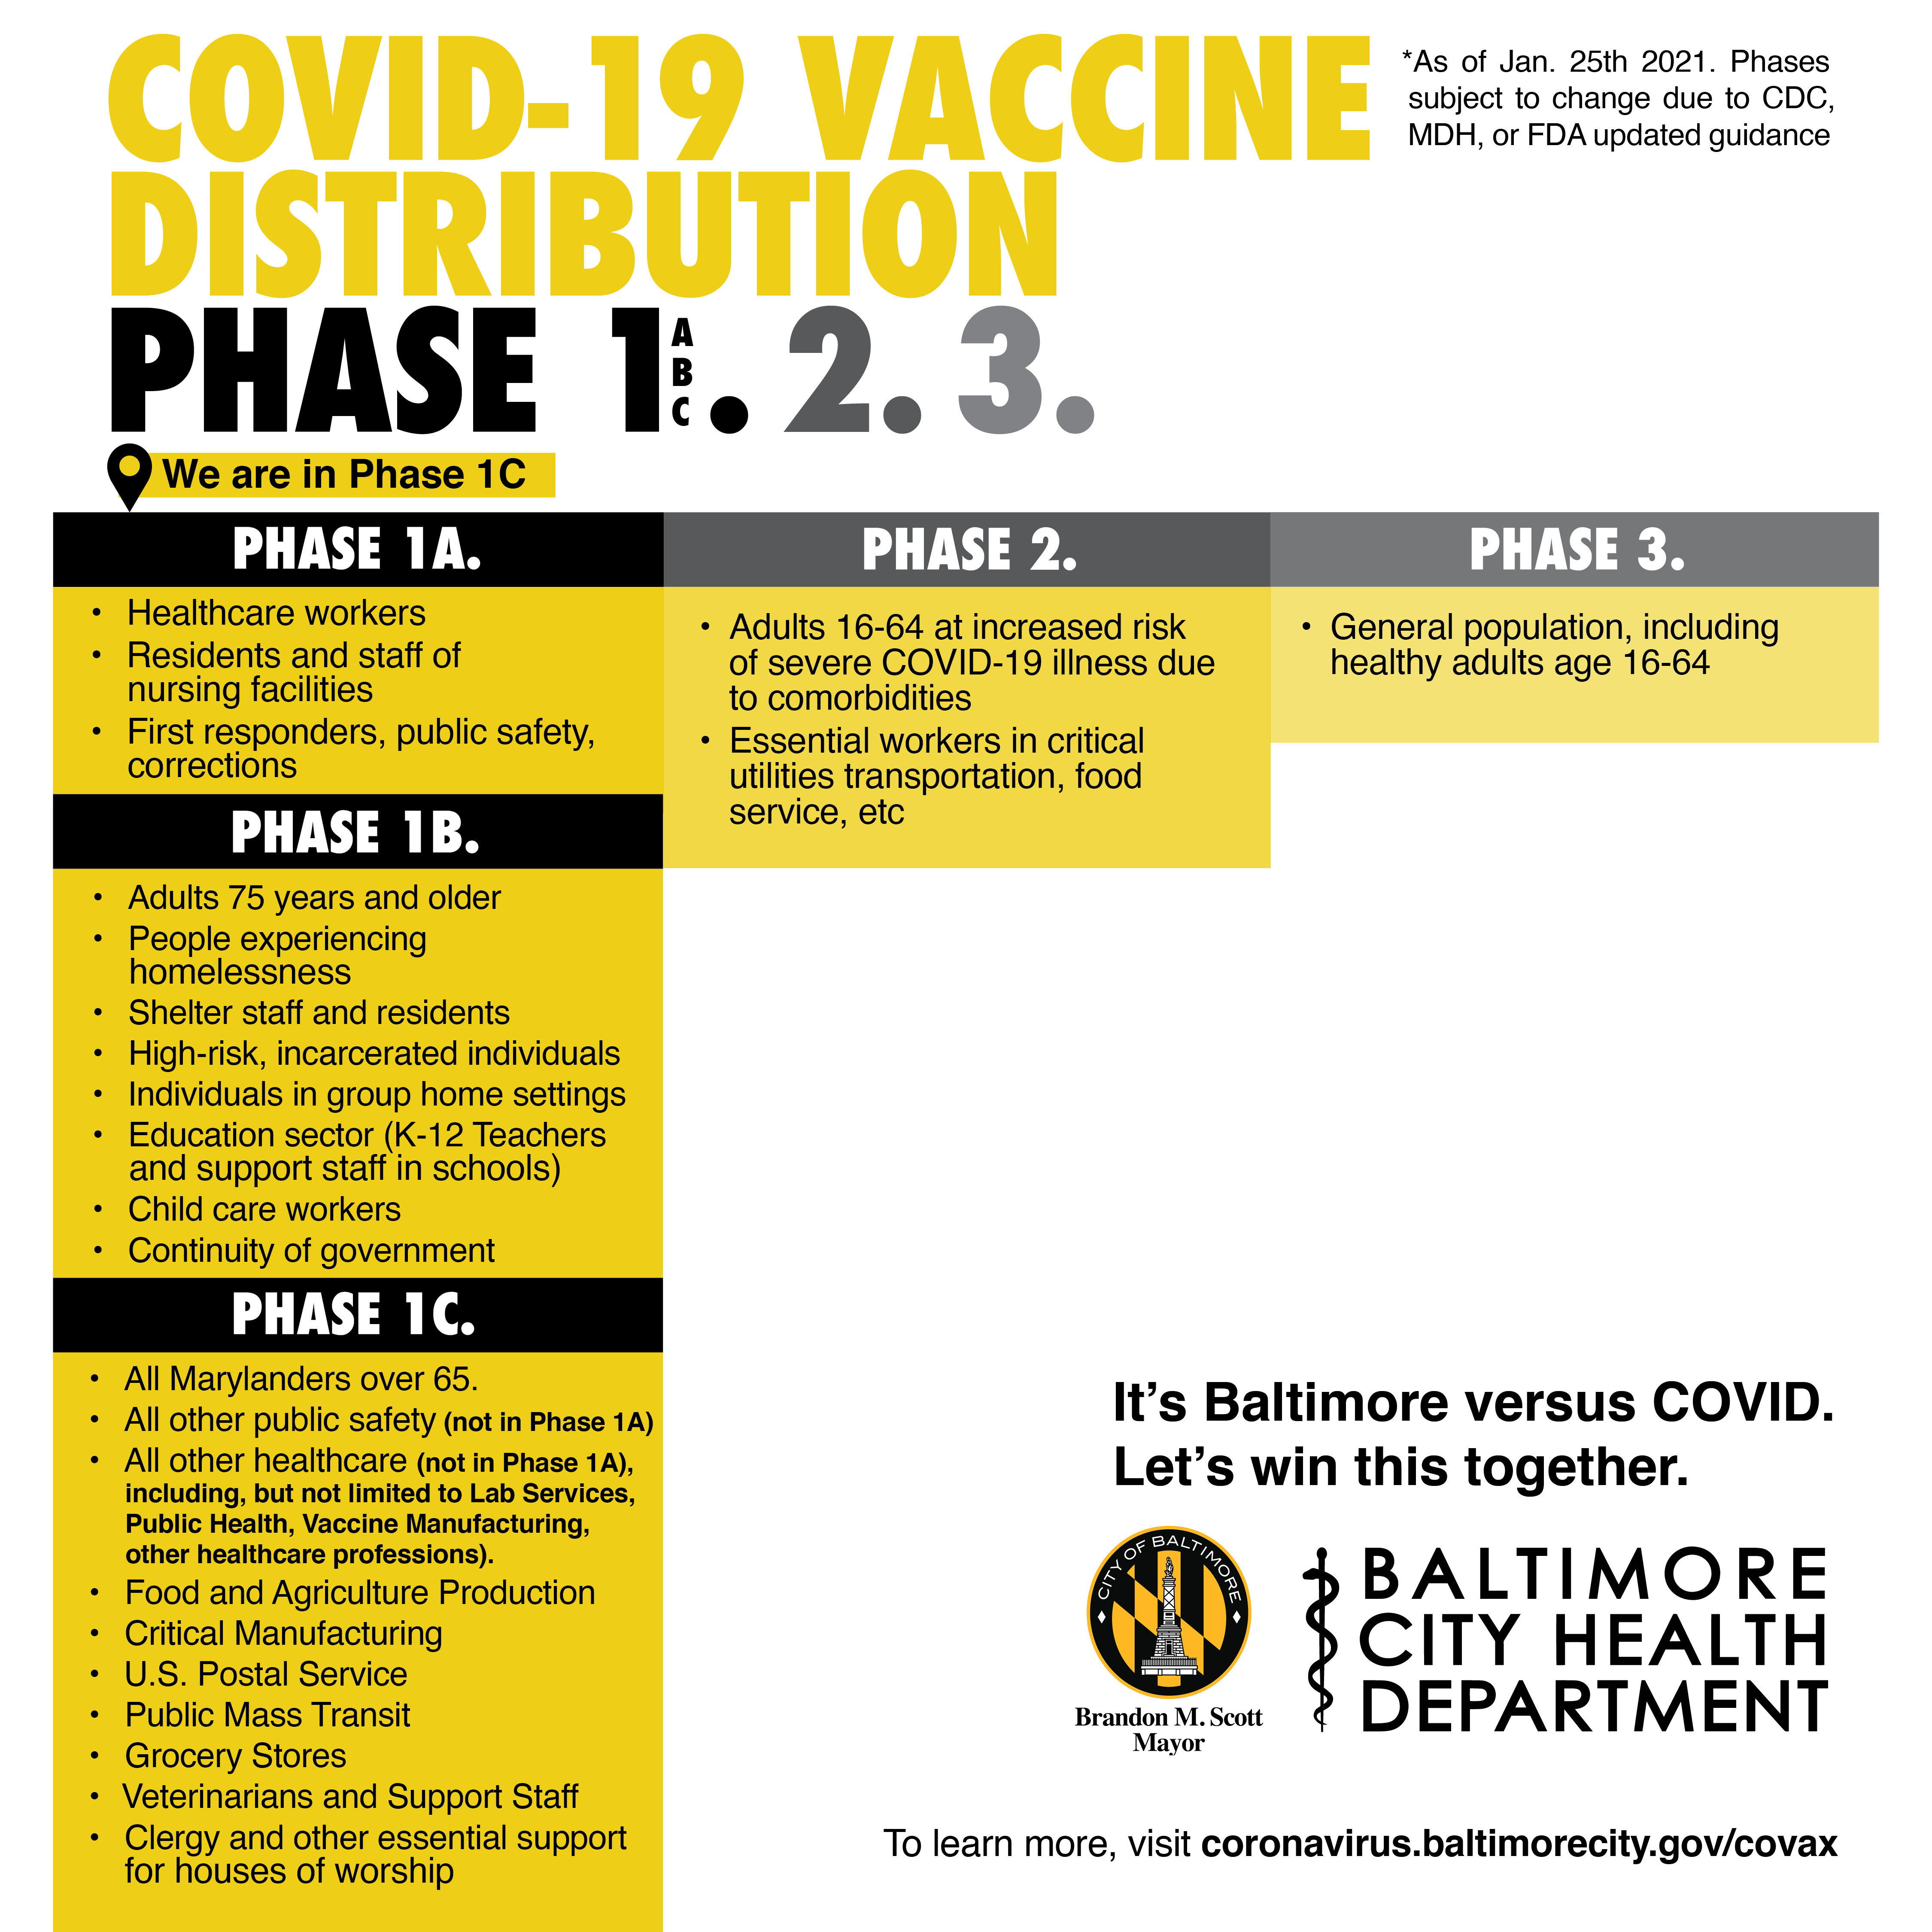 ID: COvID-19 Vaccination Distribution, Phase 1C. Currently Baltimore City is in Phase 1C, Graphic lists all those in Phase 1A, 1B, 1C eligible for vaccine. 